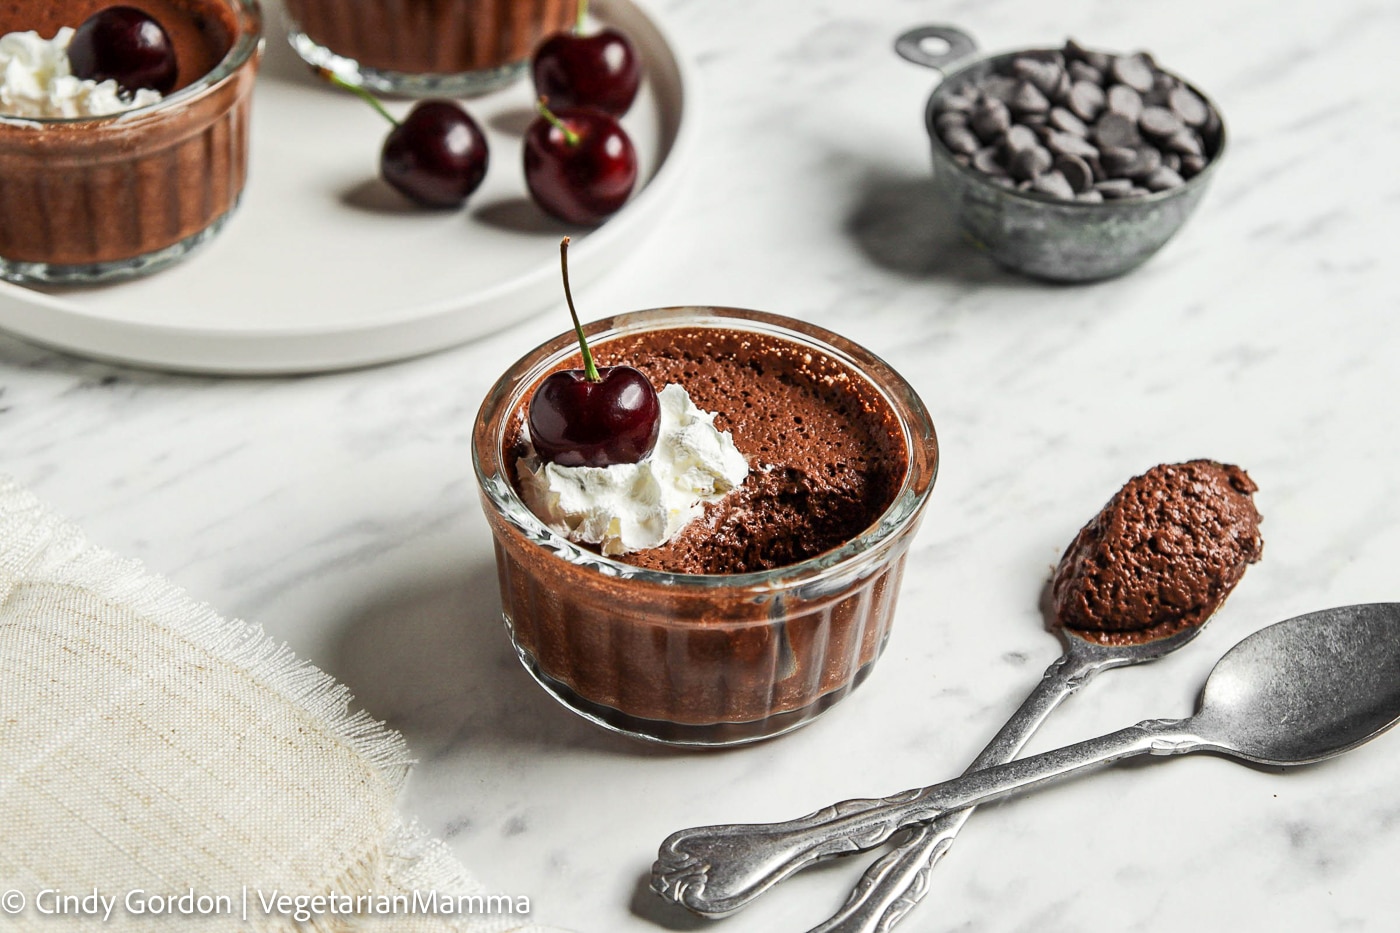 a ramekin filled with chocolate mousse with a bite taken out. Mousse is topped with whipped cream and a fresh cherry.